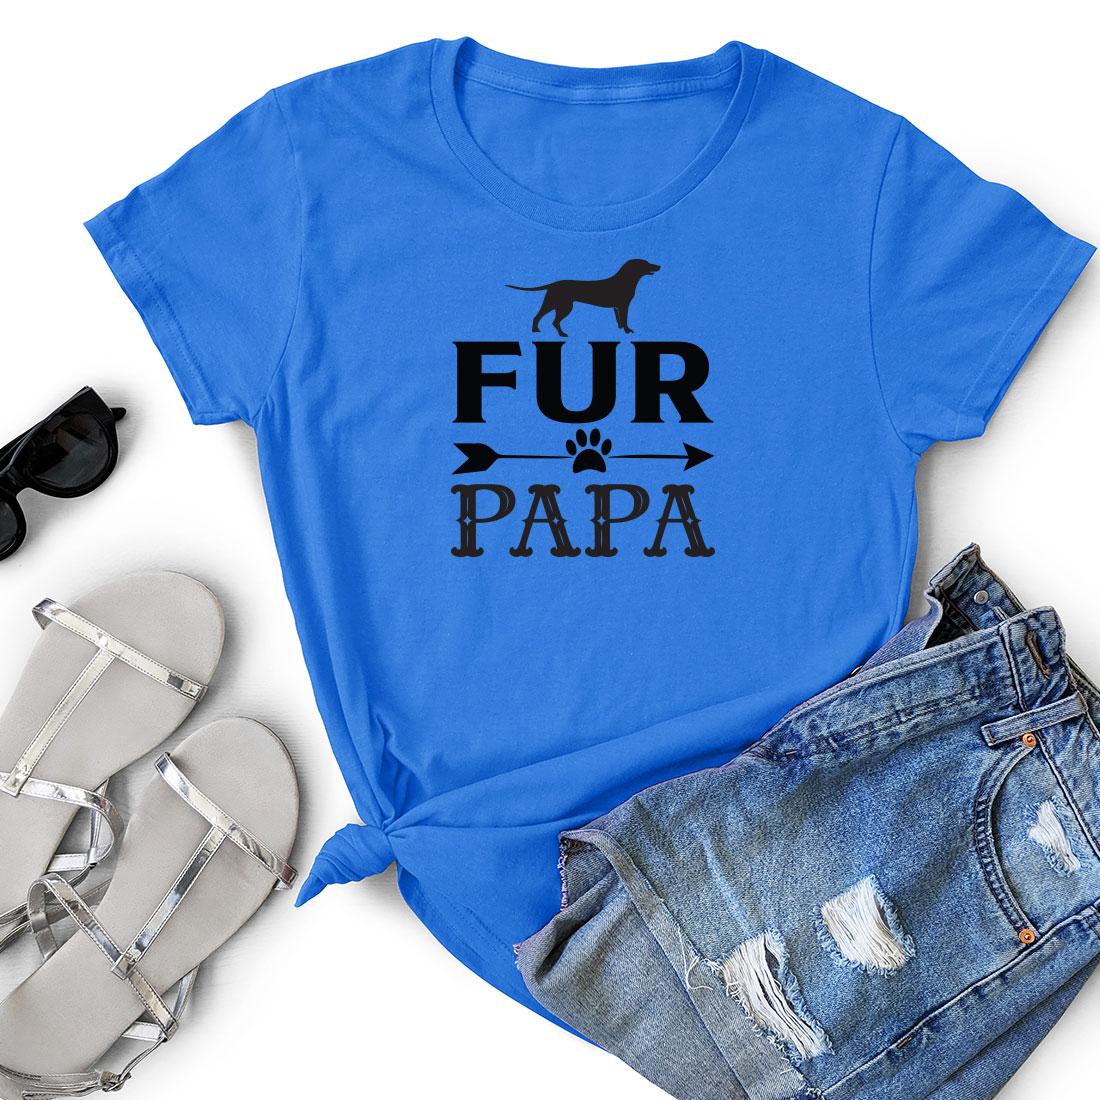 Blue shirt that says fur papa with a dog on it.